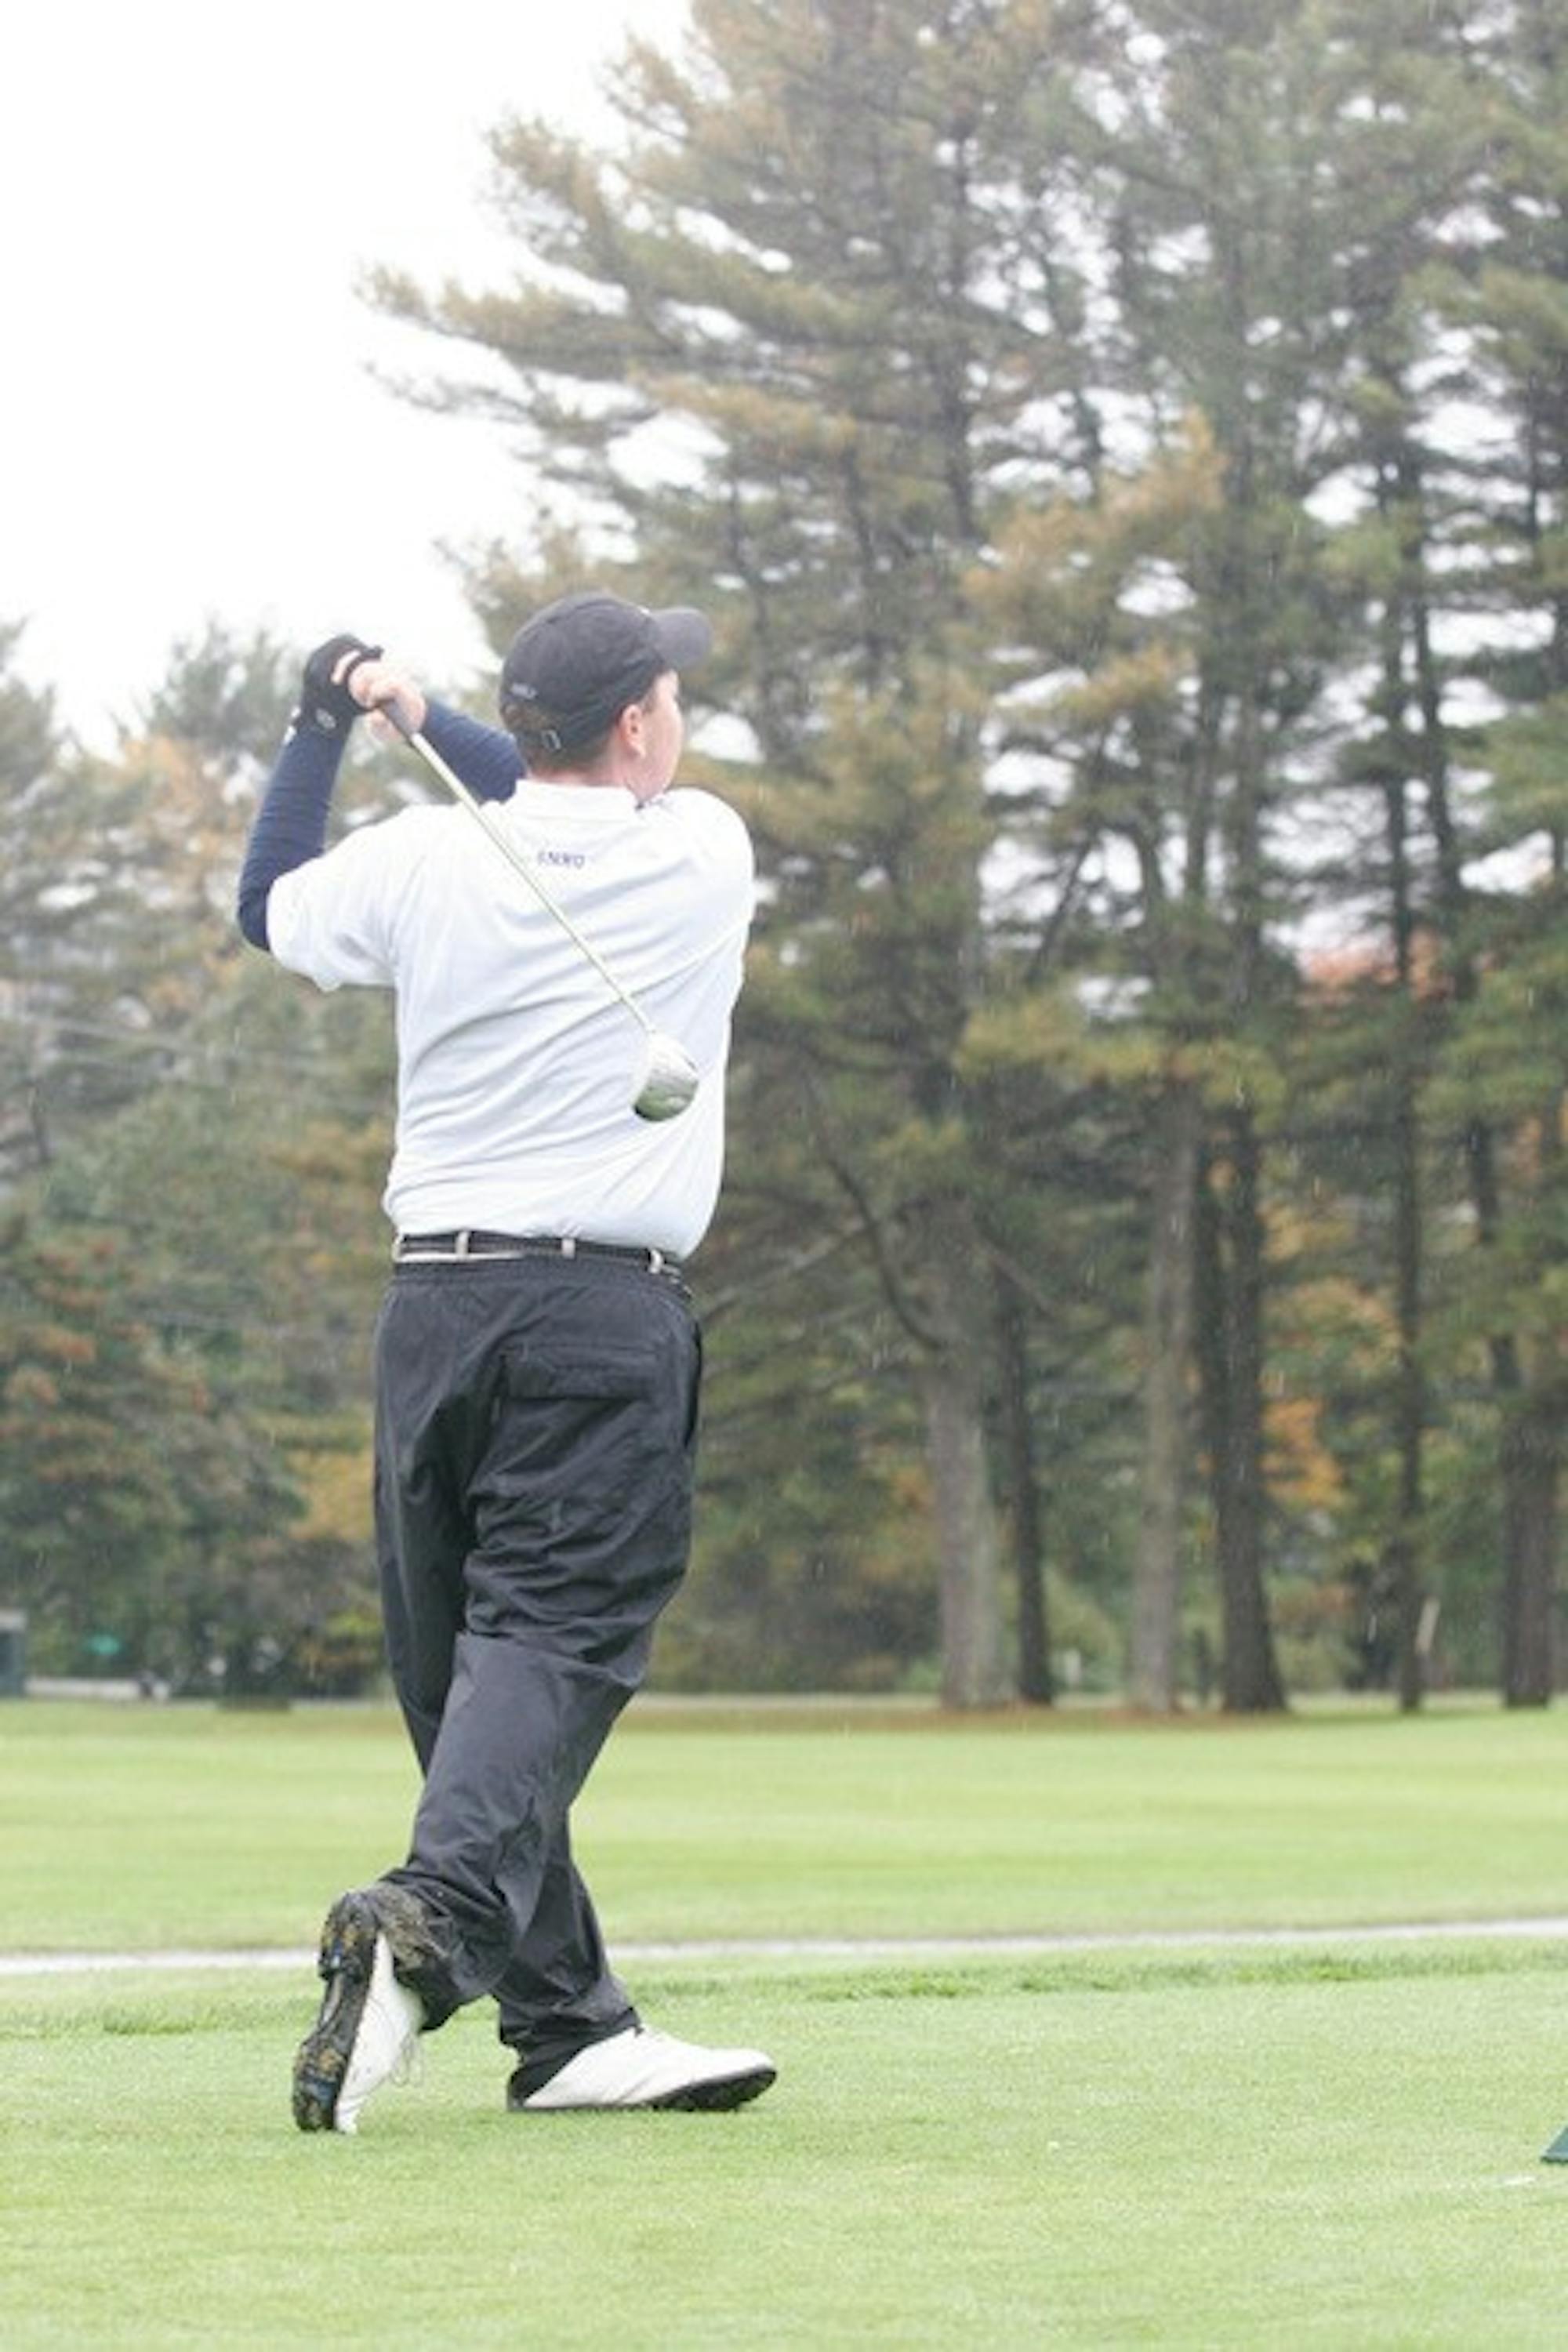 Men's golf will look to conclude the fall season in style this weekend at the ECAC Championships at Shelter Harbor Golf Club in Charlestown, R.I.